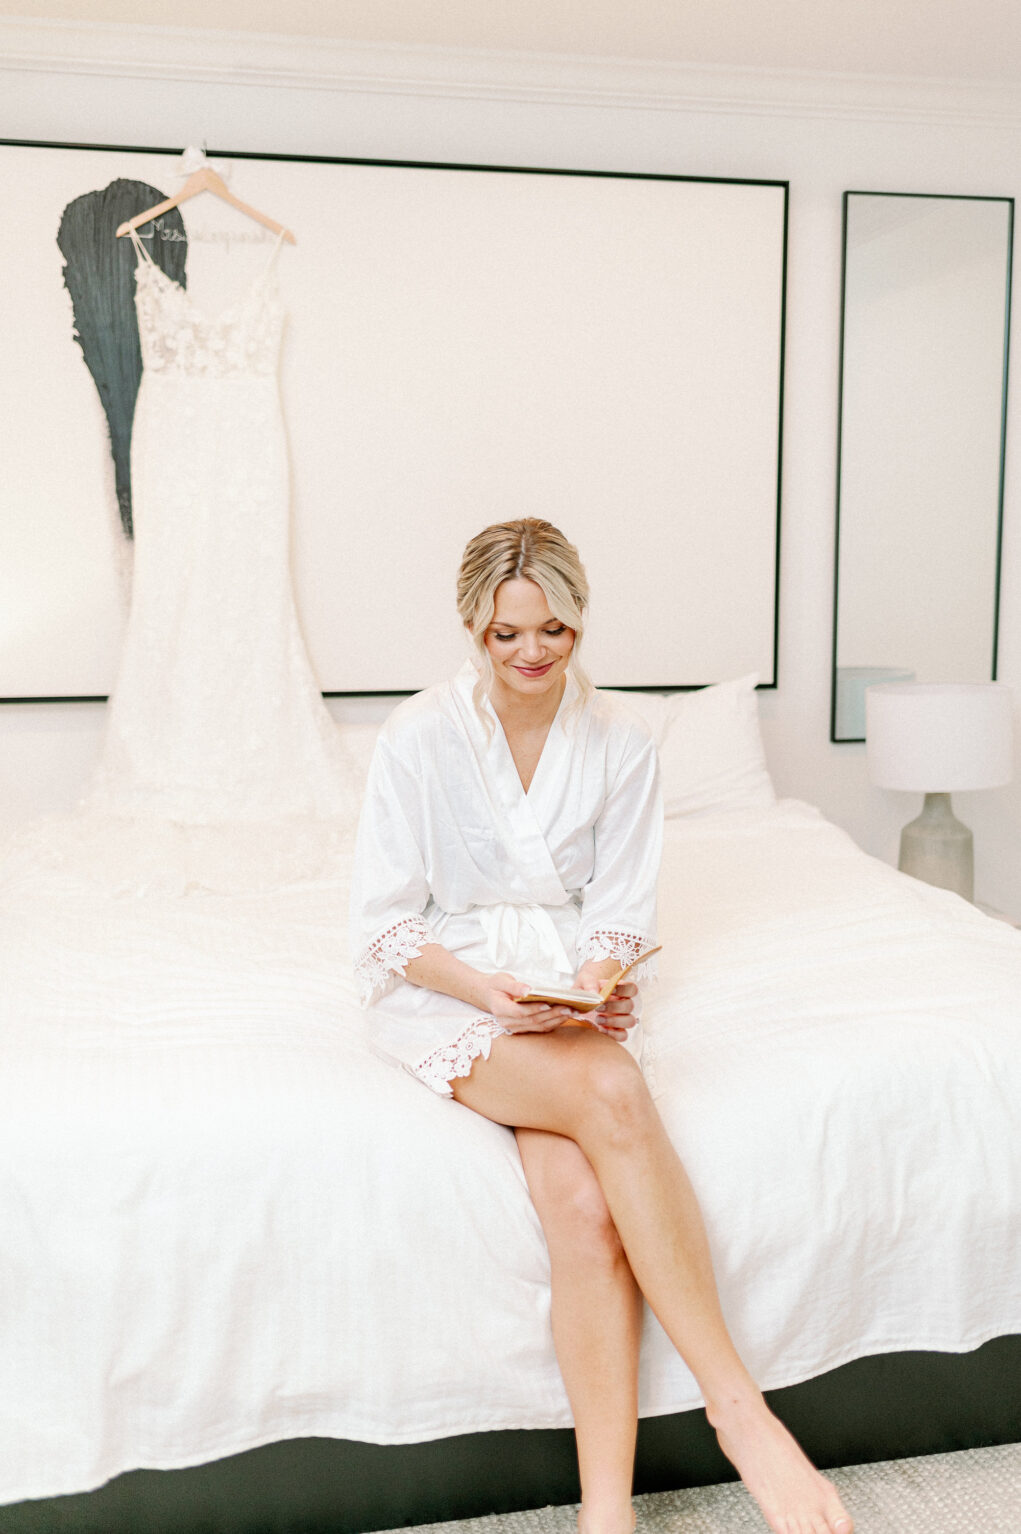 Bride Getting Ready in White Robe on Wedding Day | Tampa Photographer Dewitt for Love Photography